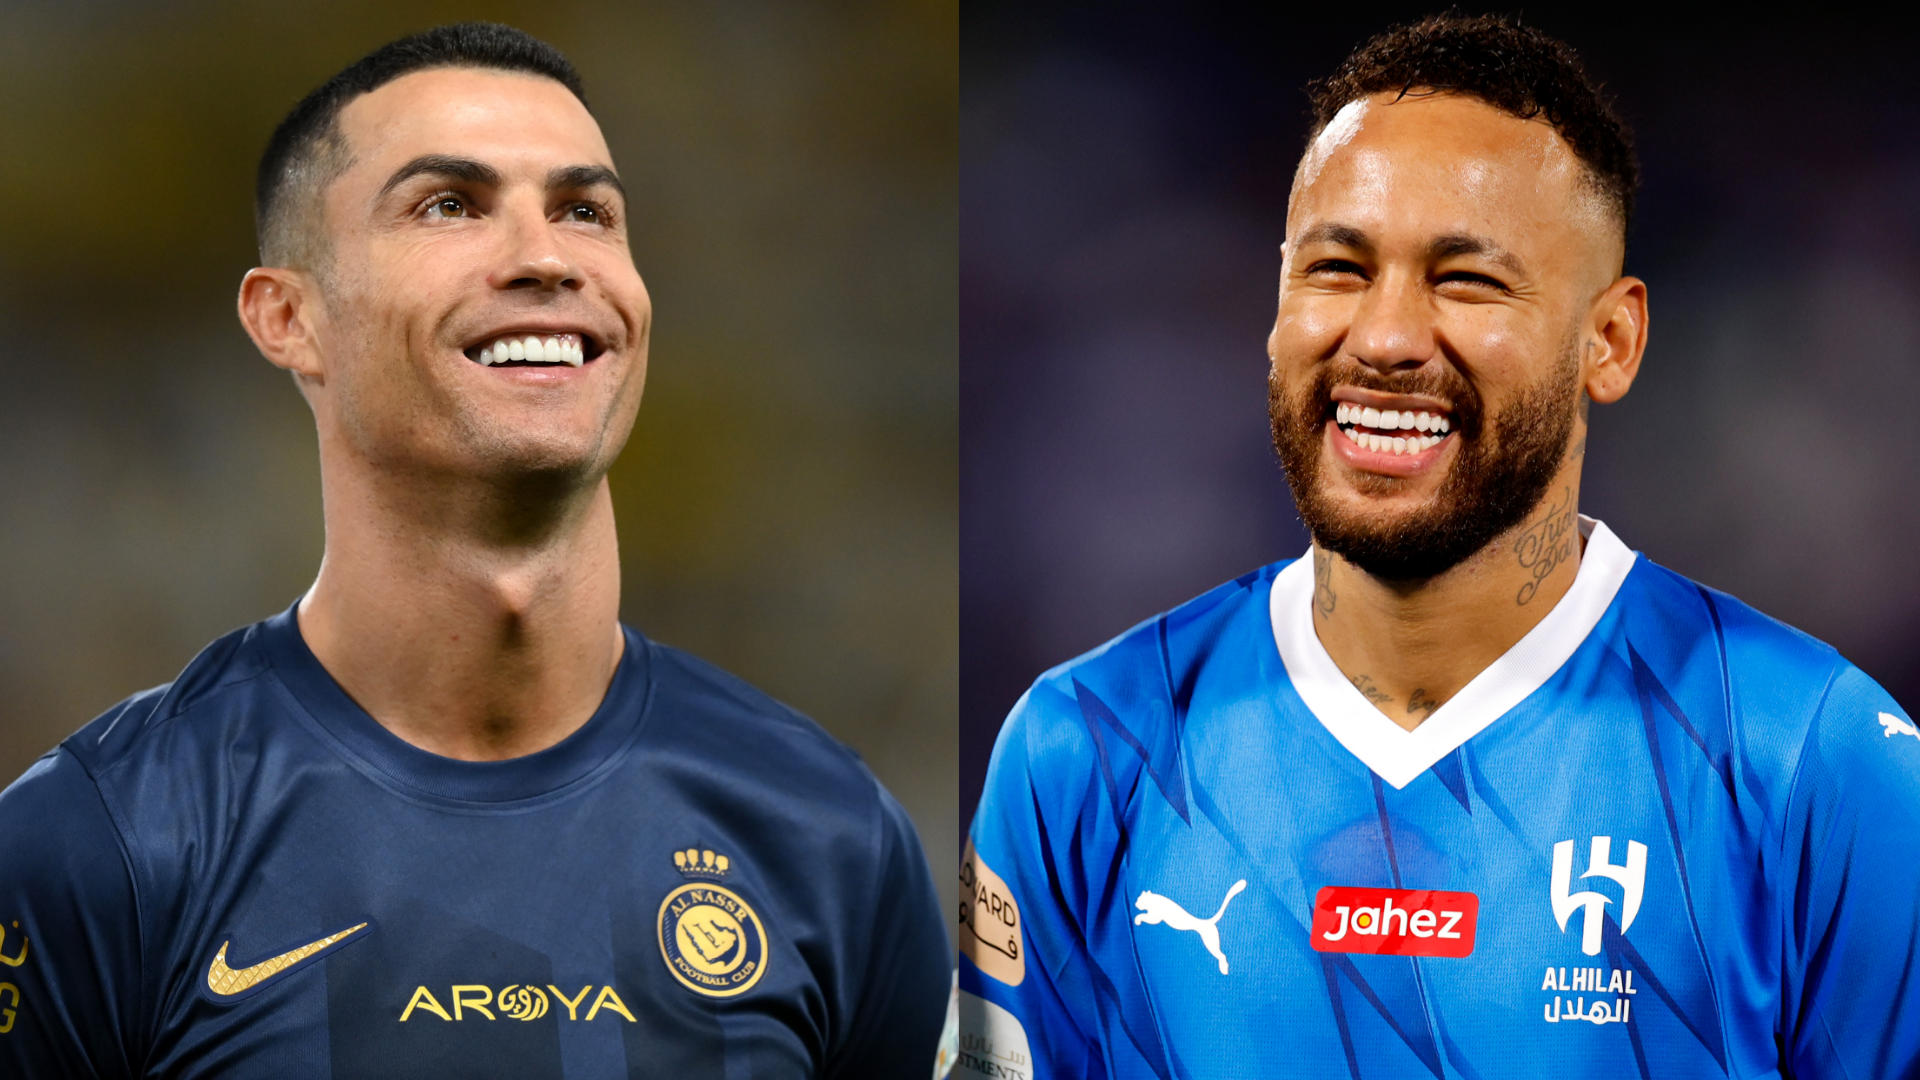 Revealed: Why Cristiano Ronaldo and Neymar did not cost Al-Nassr or Al-Hilal anything as Saudi Pro League chief outlines competition’s transfer structure | Goal.com UK